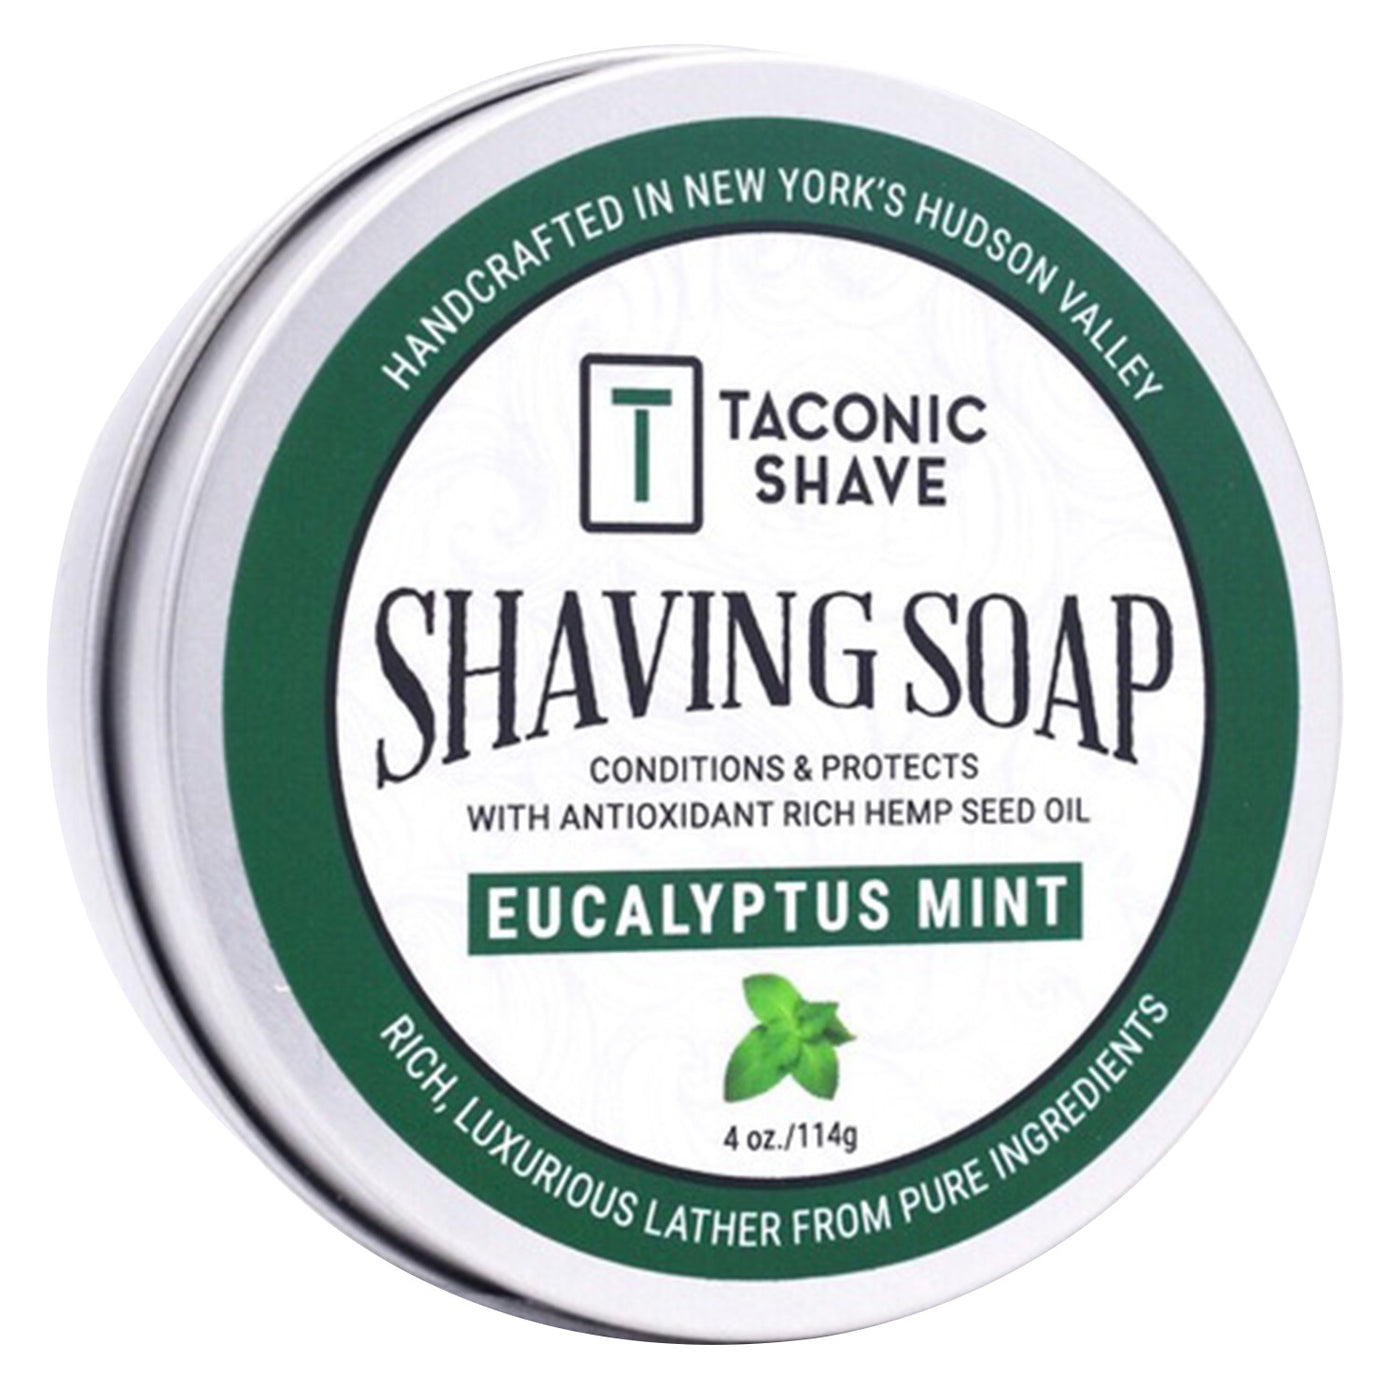  Taconic Shave Hemp & Eucalyptus Mint Shave Soap by Taconic Shave sold by Naked Armor Razors